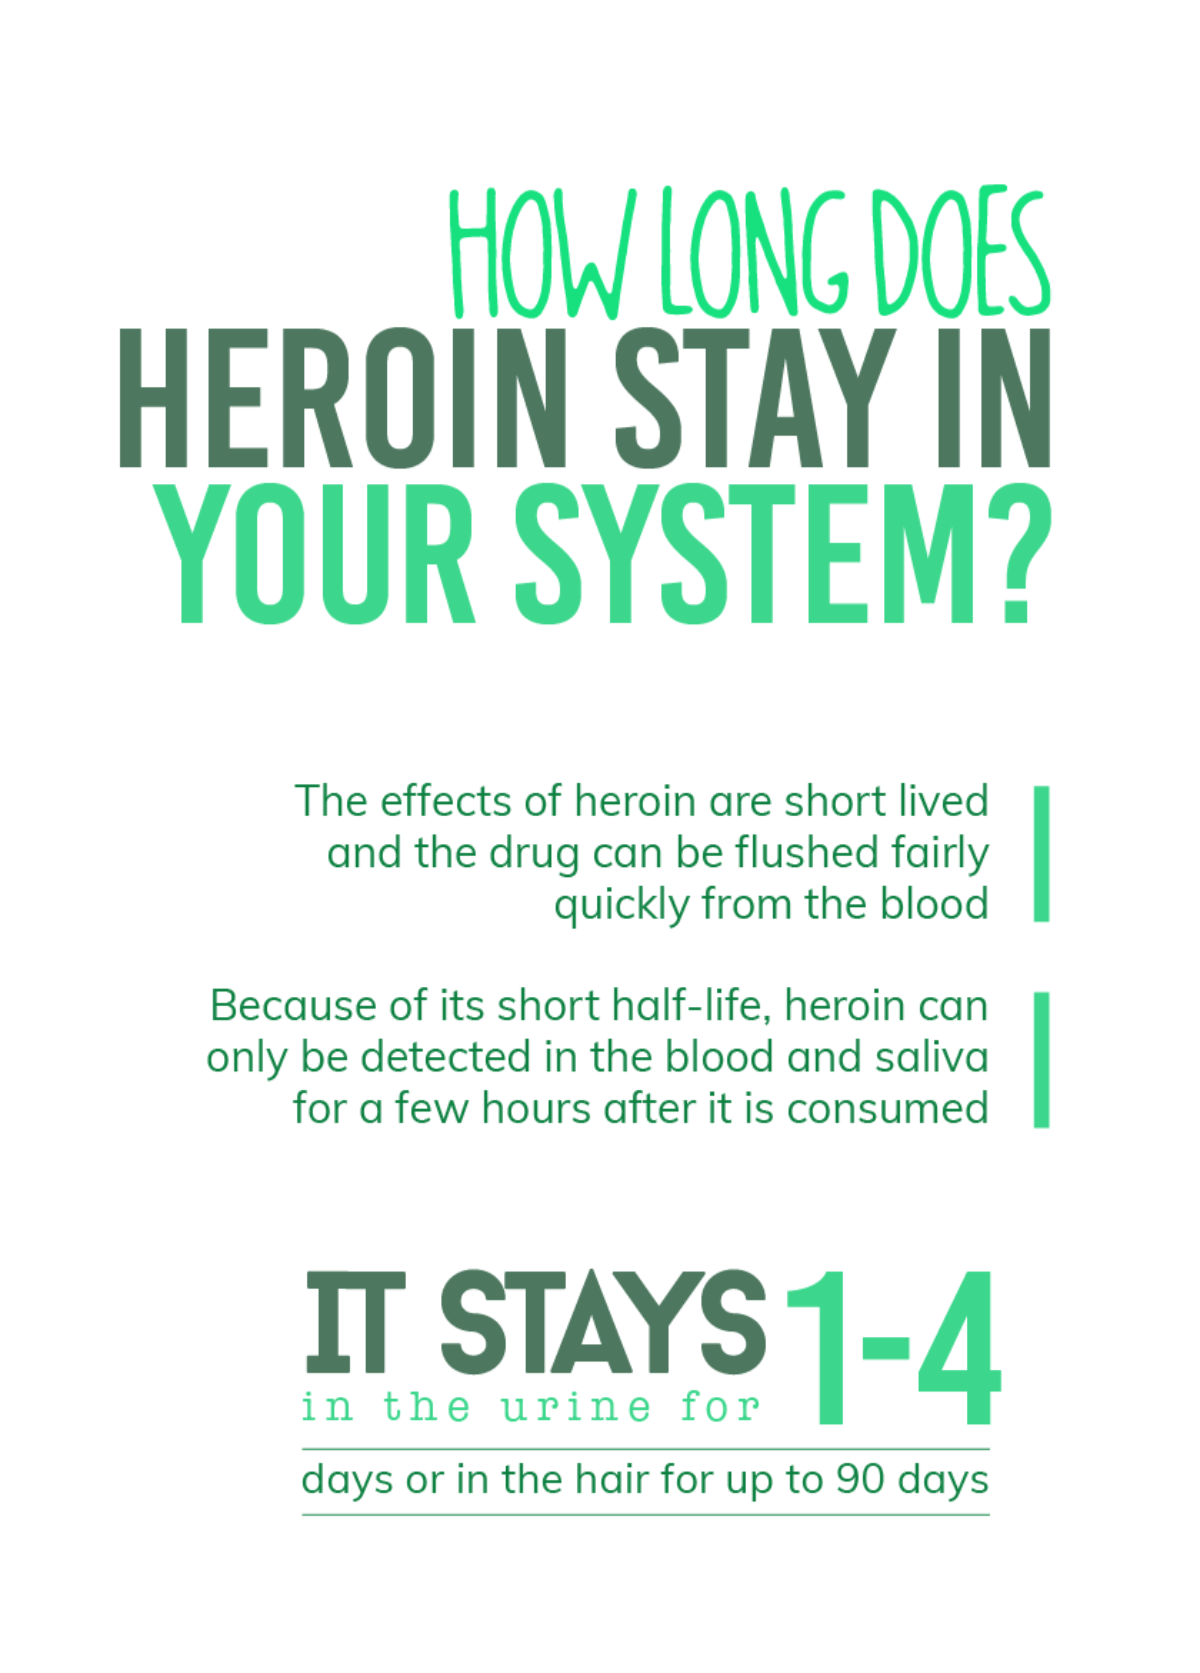 How Long Does Heroin Stay in Your System Mobile 2